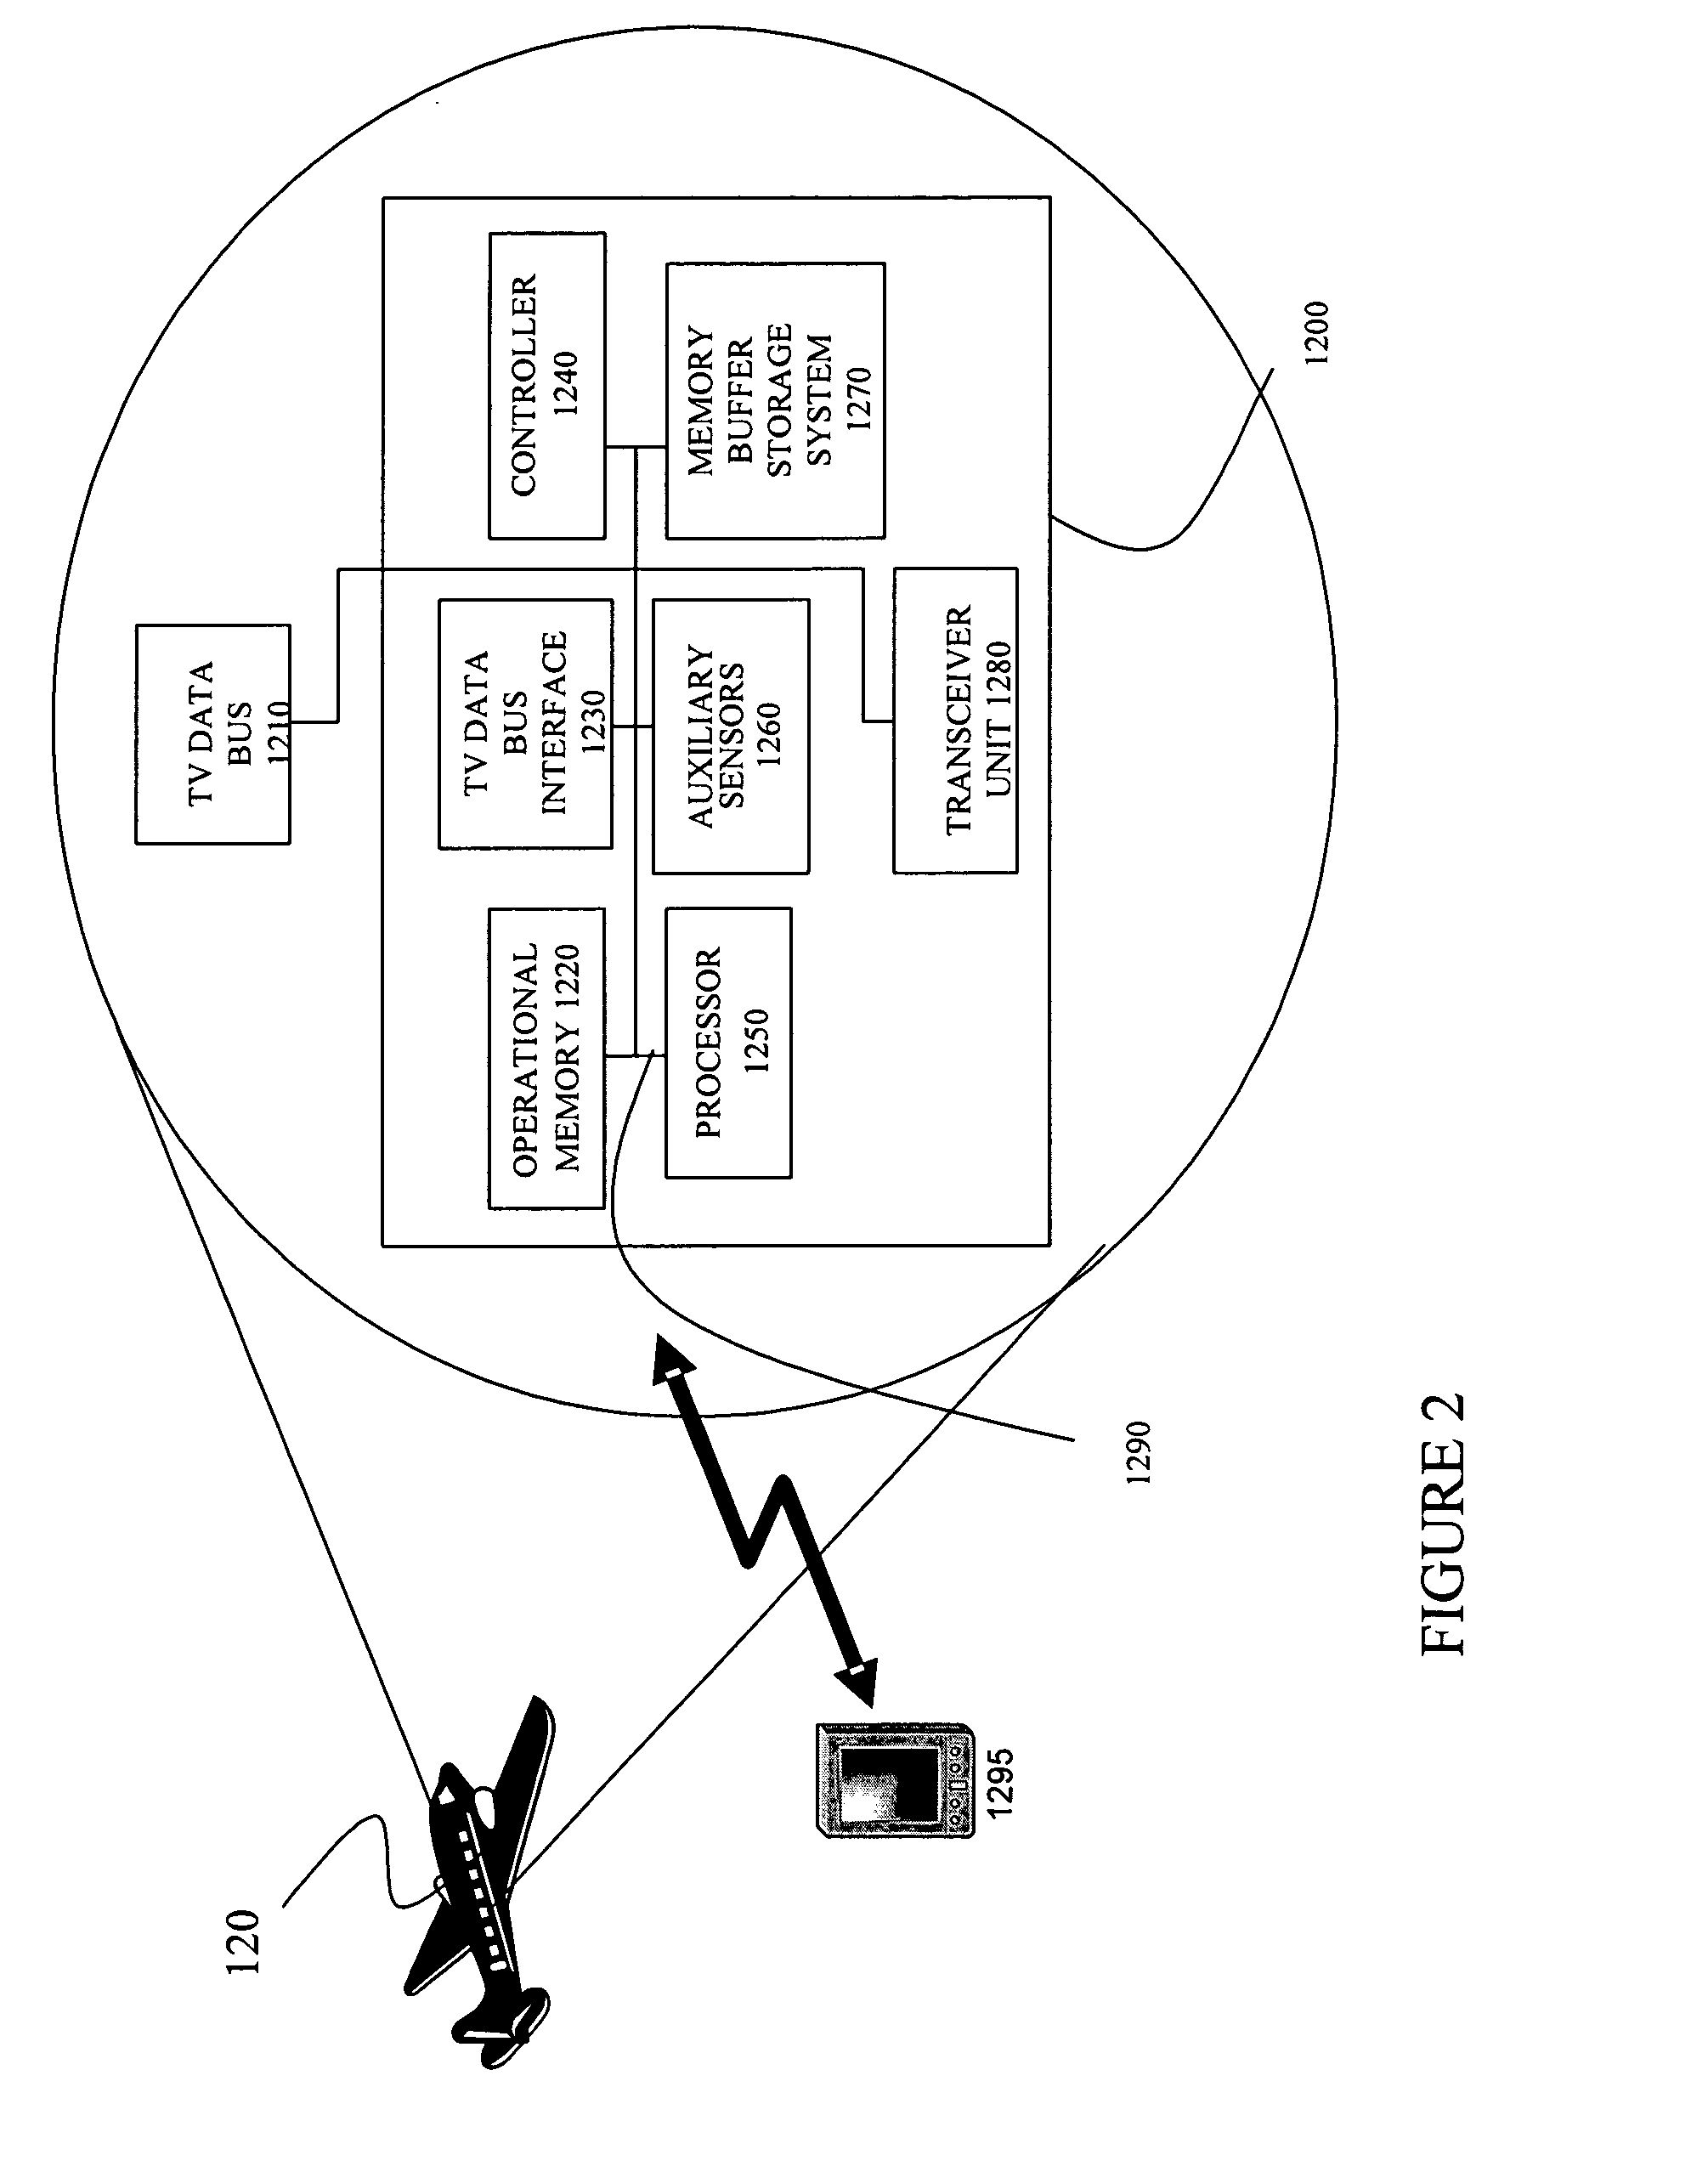 System and method for transportation vehicle monitoring, feedback and control